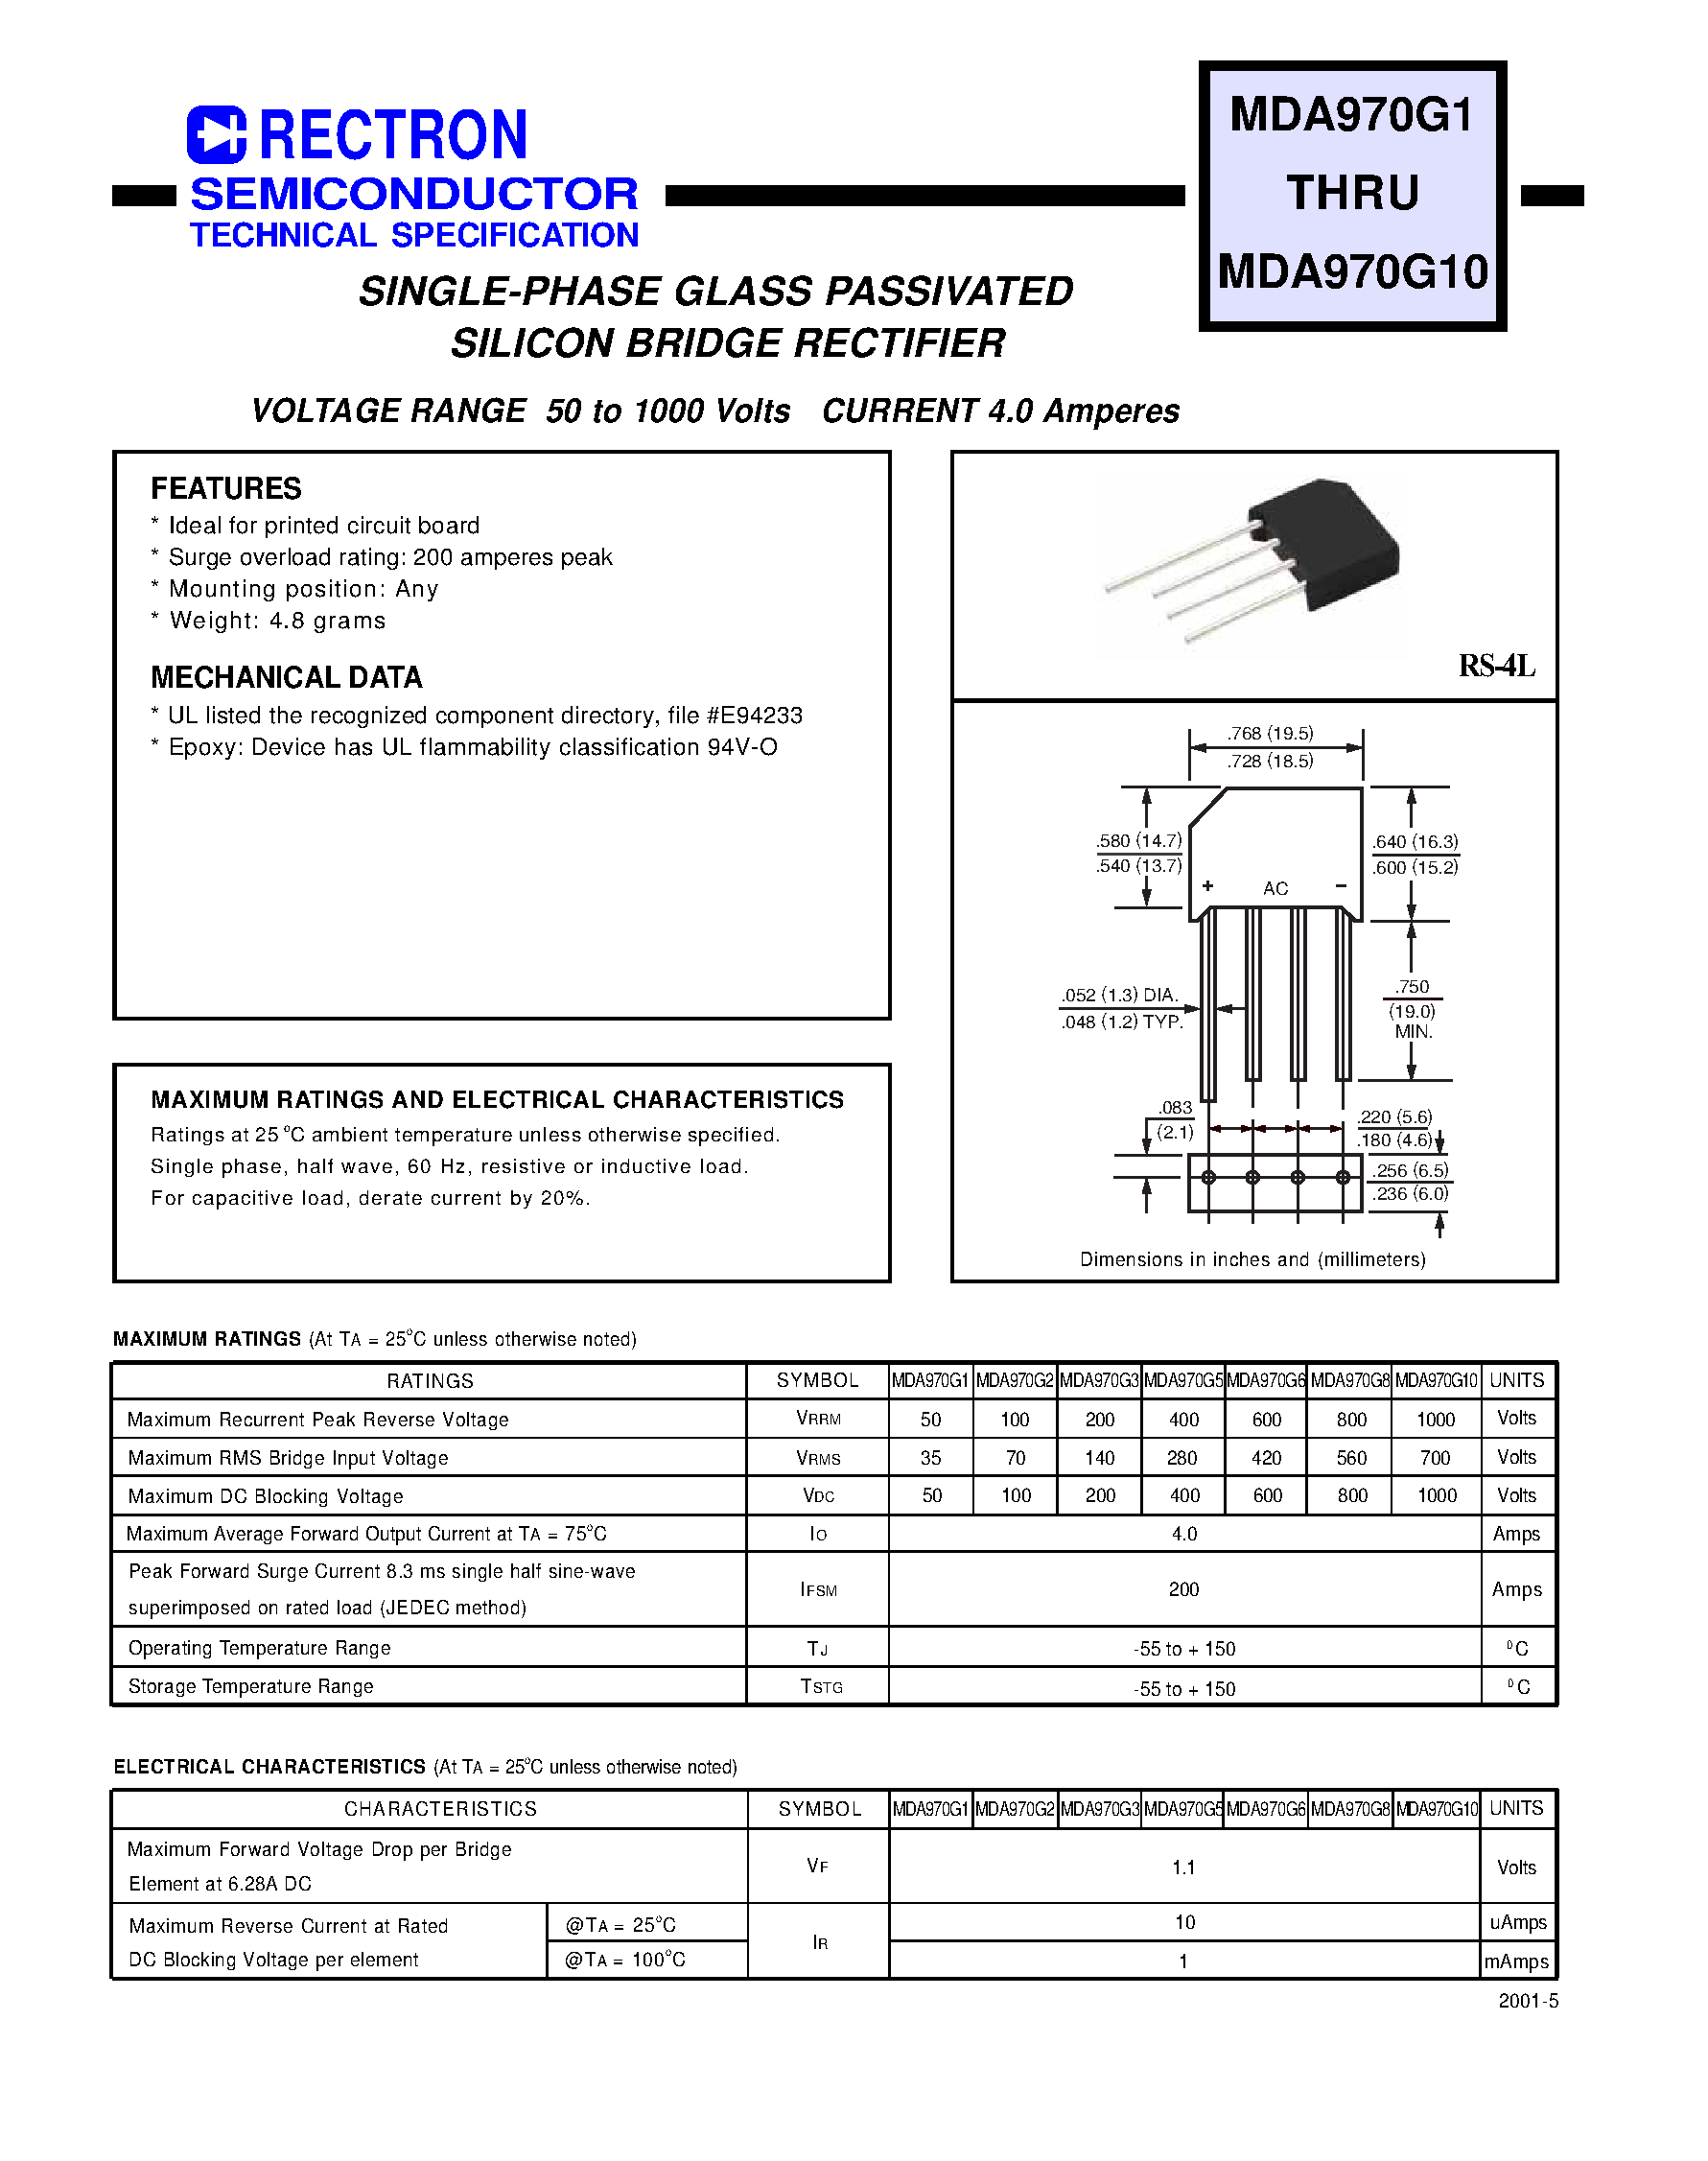 Datasheet MDA970G5 - SINGLE-PHASE GLASS PASSIVATED SILICON BRIDGE RECTIFIER (VOLTAGE RANGE 50 to 1000 Volts CURRENT 4.0 Amperes) page 1